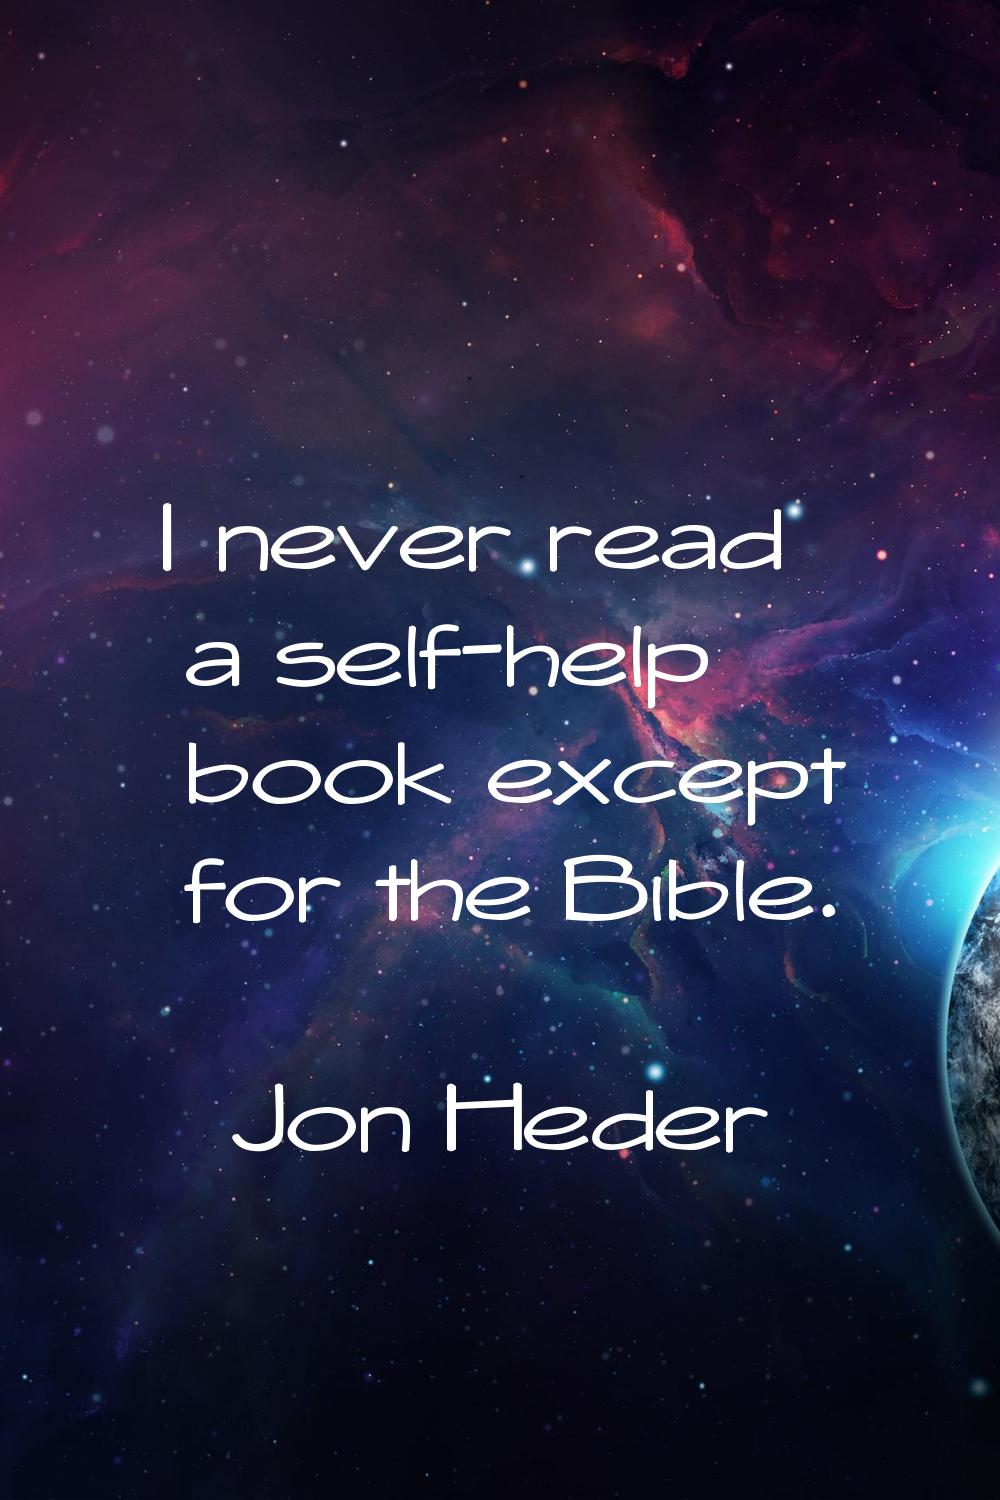 I never read a self-help book except for the Bible.